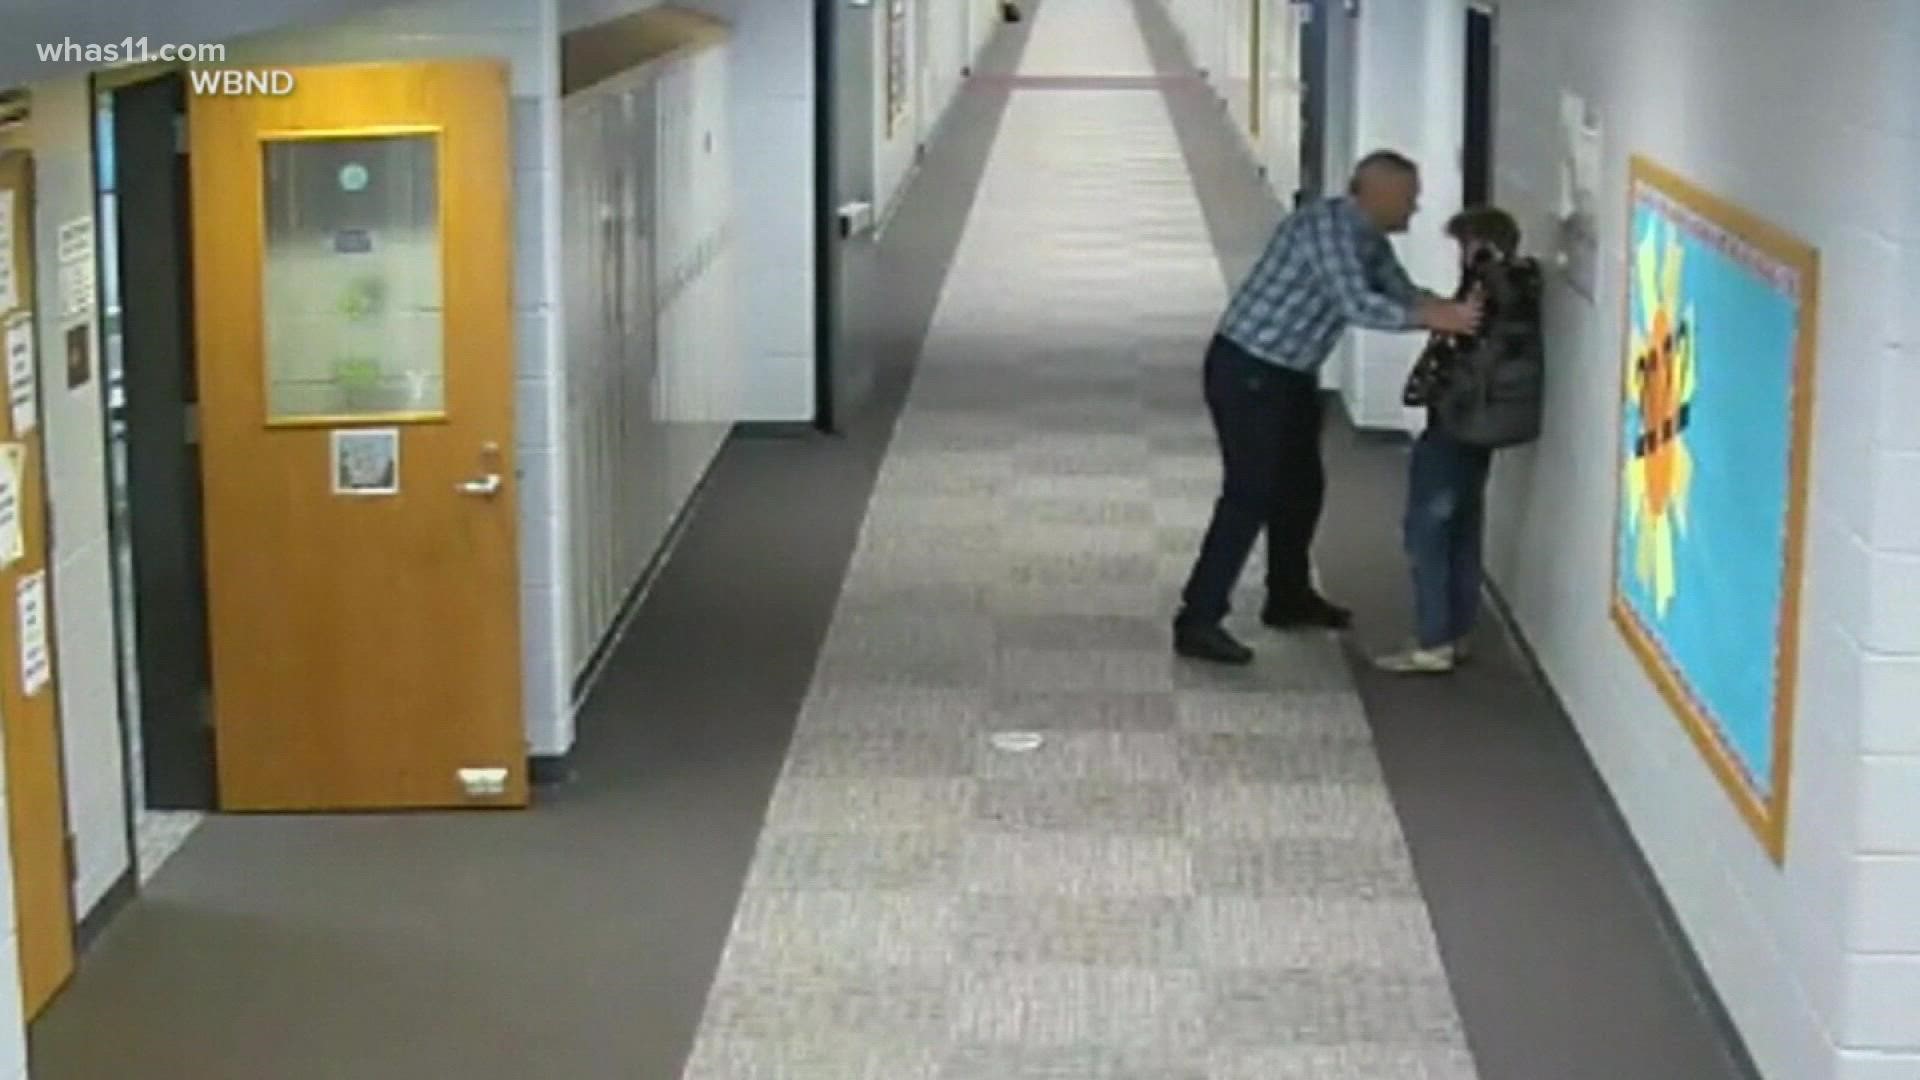 The Jimtown High School teacher was barred from school grounds for striking the student, which was caught on school security cameras.